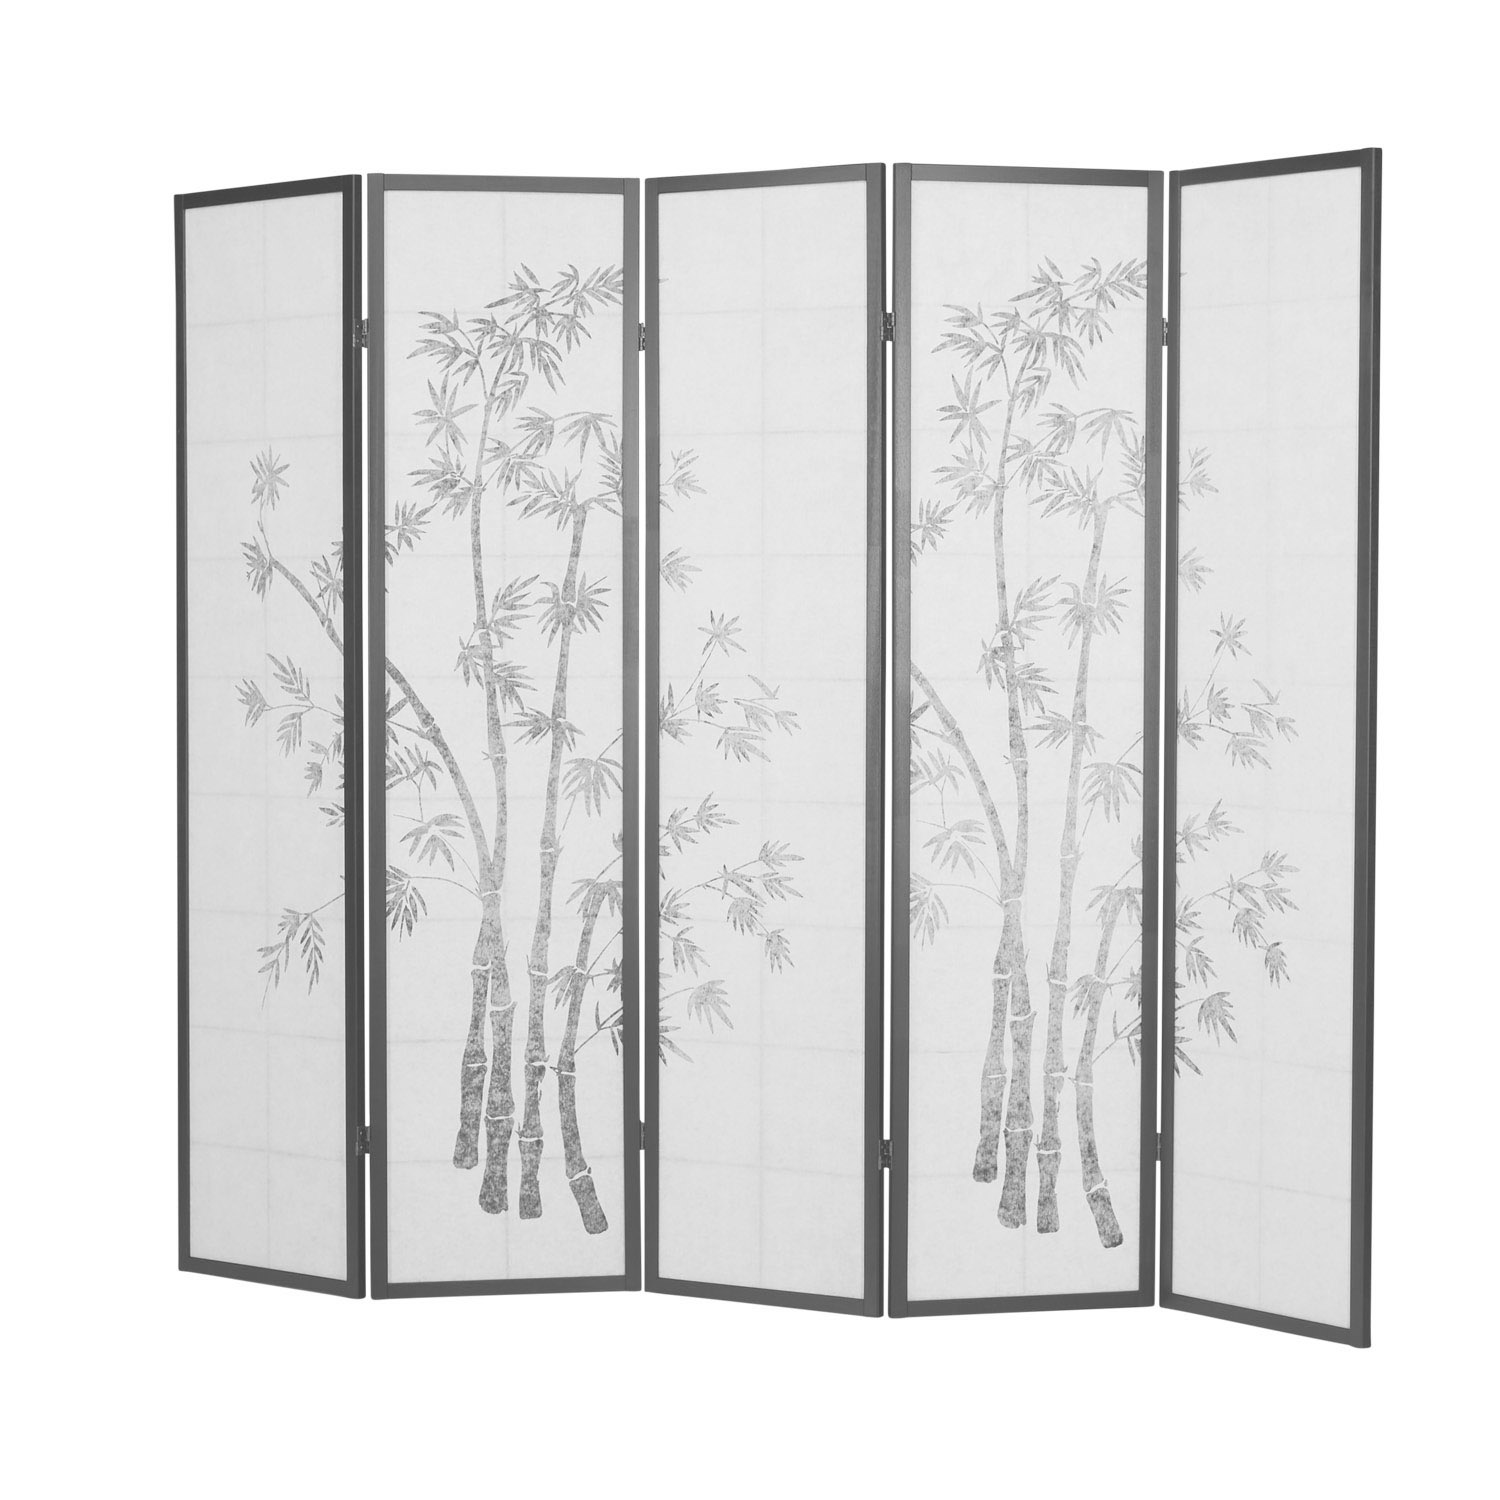 Paravent room divider 5 pieces, wood black, rice paper white, bamboo pattern, height 179 cm	